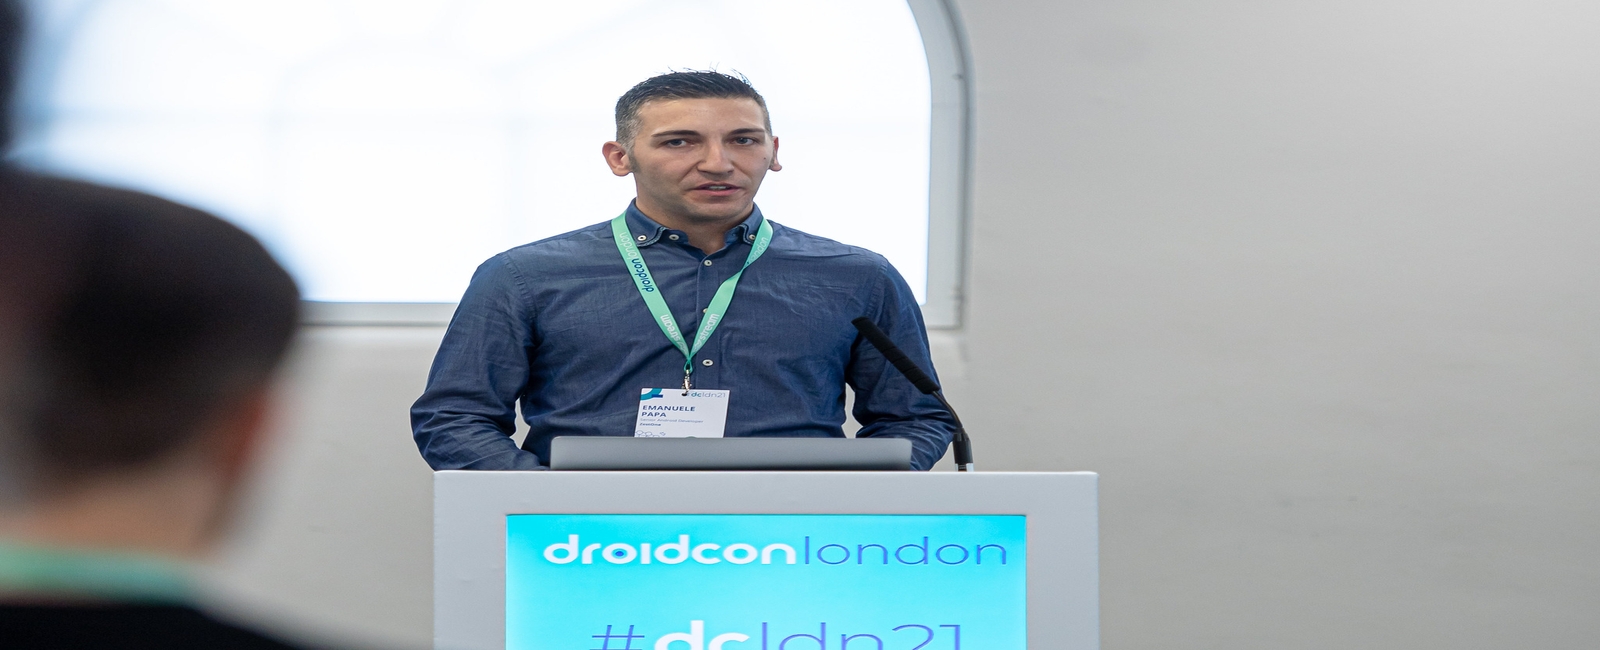 Flutter code generation with Paddinger at droidcon London 2021